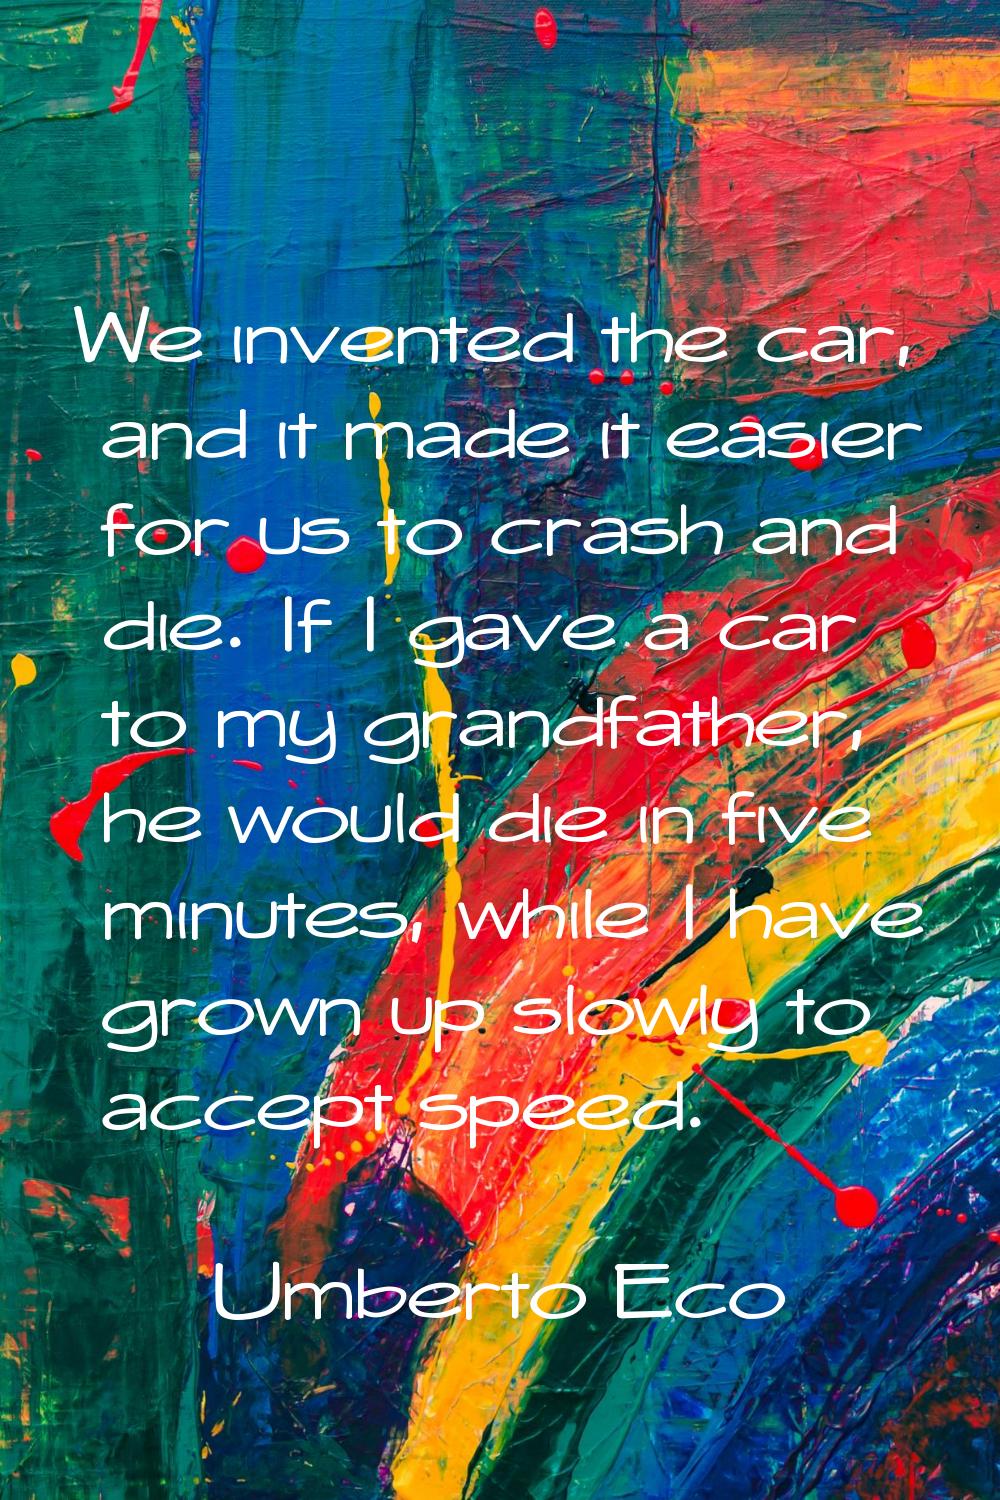 We invented the car, and it made it easier for us to crash and die. If I gave a car to my grandfath